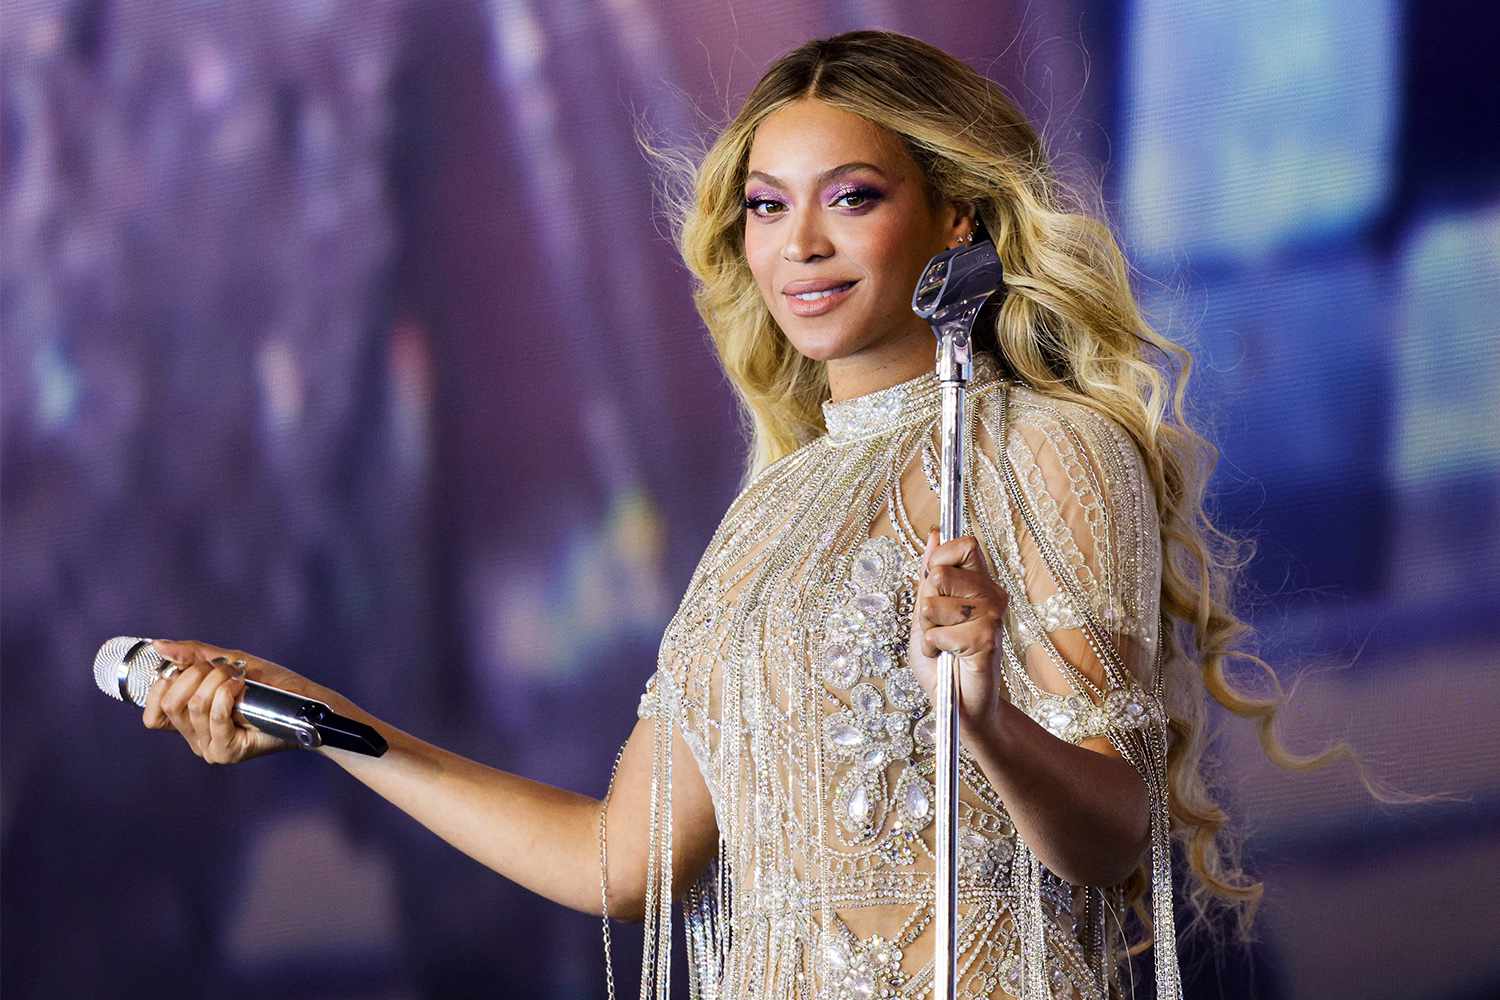 Beyoncé Rocks Platinum Blonde Hair And Silvery Outfit Amidst Controversy